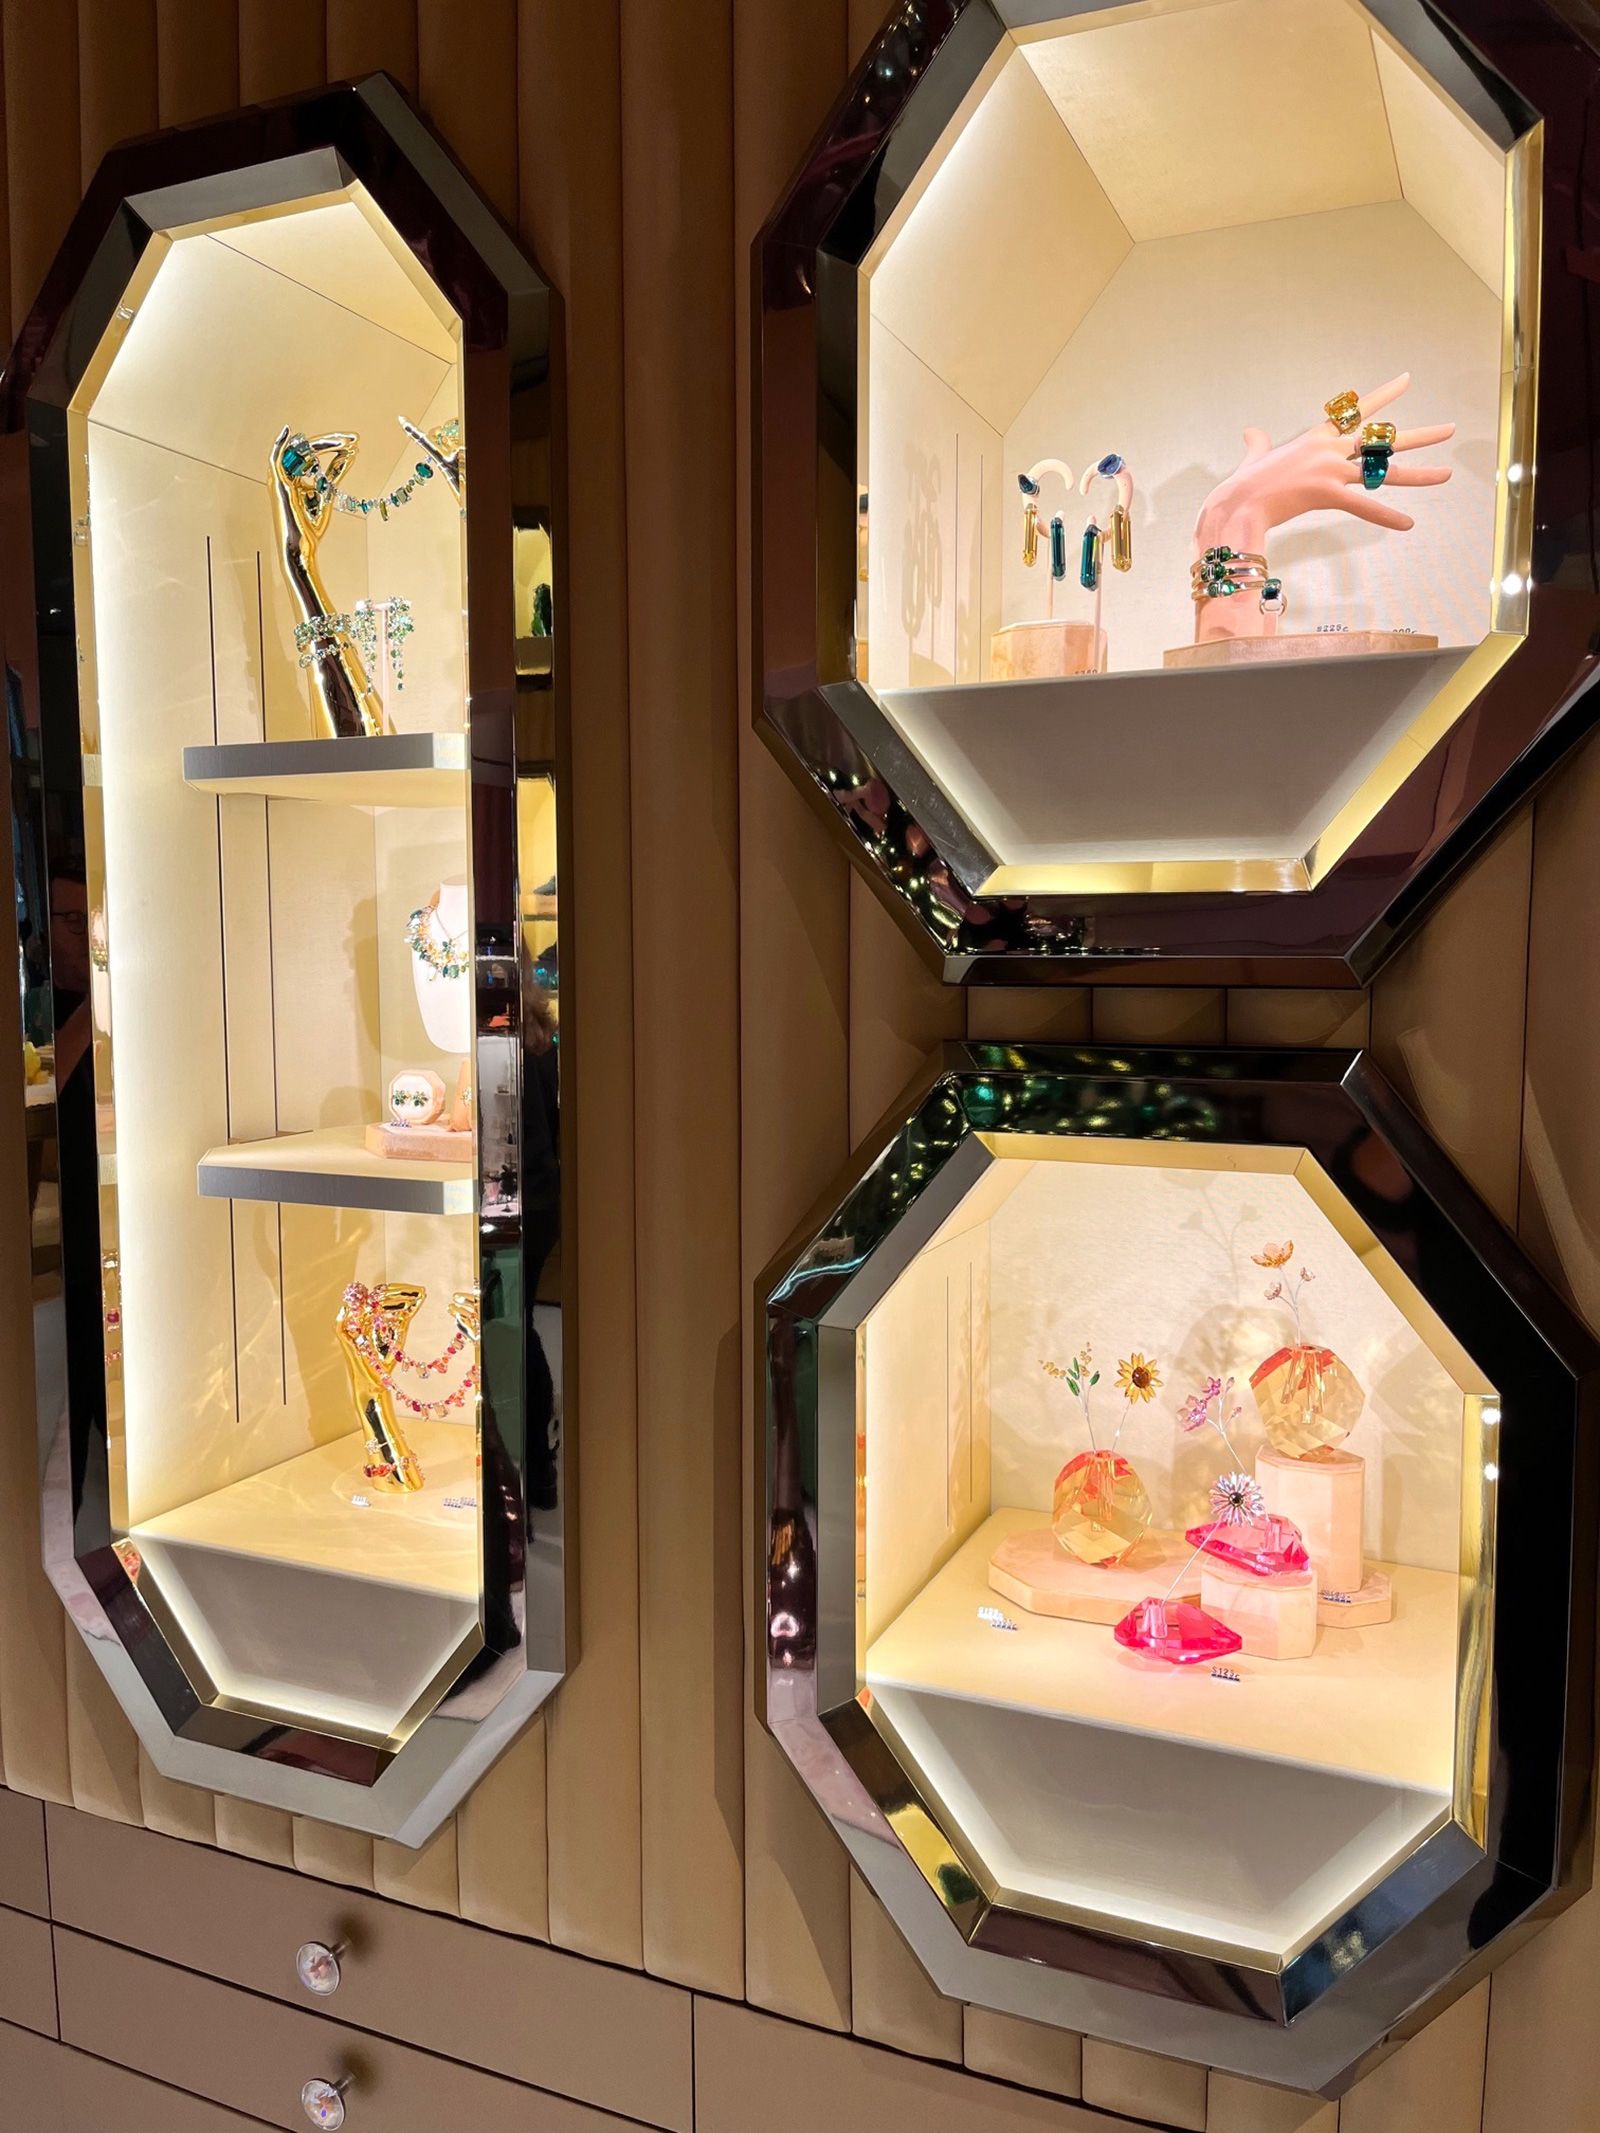 Octagonal display cases, in various sizes, feature throughout the store, showcasing the breadth of Swarovski's product lines.